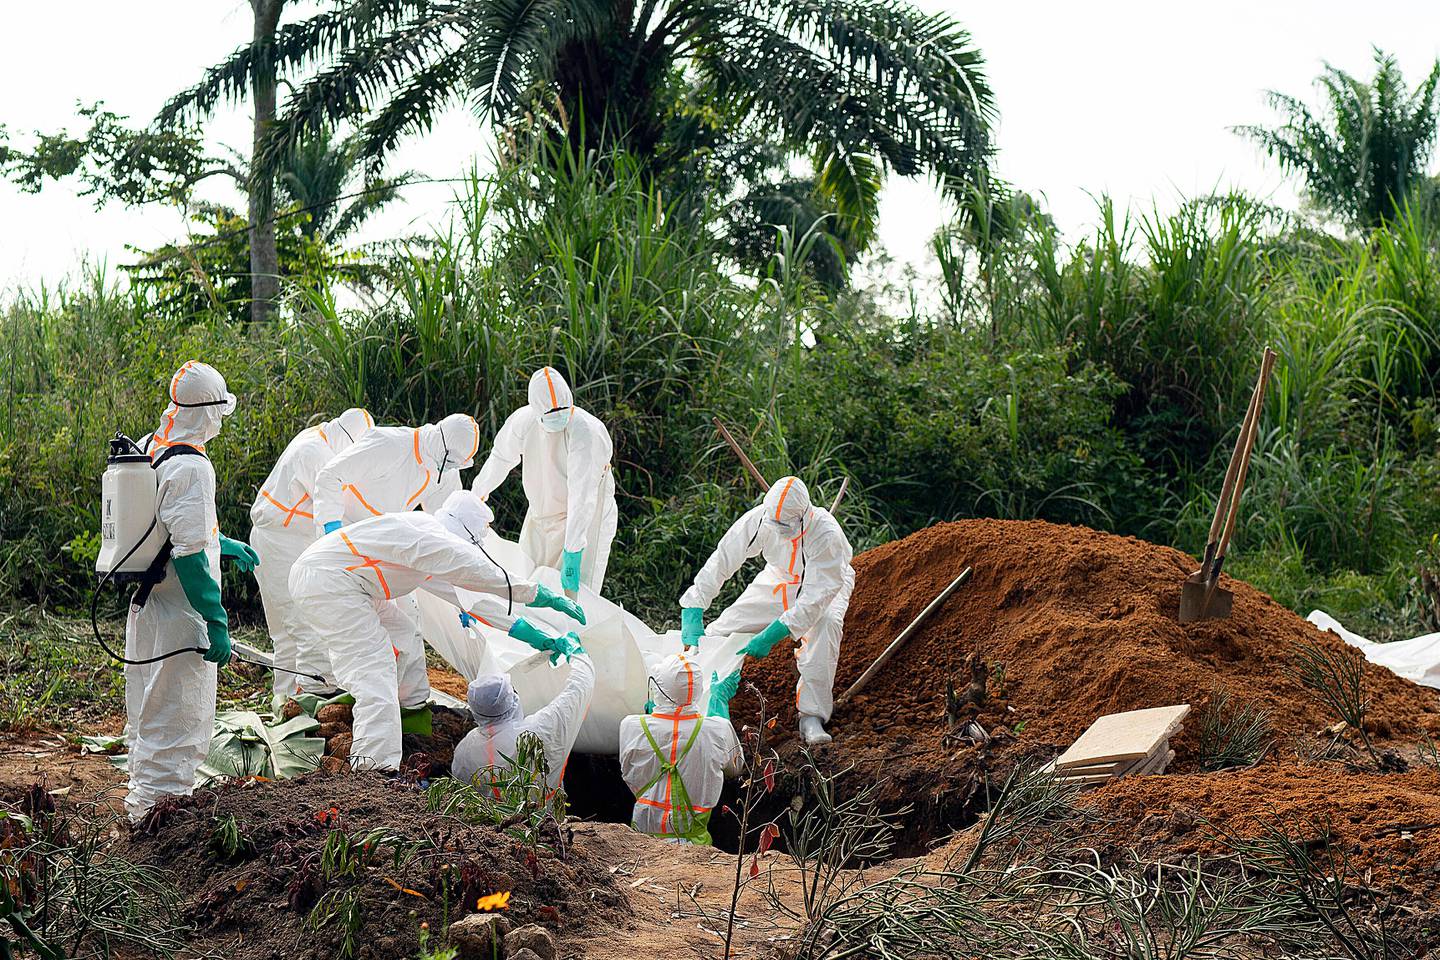 FILE - In this Sunday, July 14, 2019 file photo, an Ebola victim is put to rest at the Muslim cemetery in Beni, Congo. These African stories captured the world's attention in 2019 - and look to influence events on the continent in 2020. (AP Photo/Jerome Delay, File)